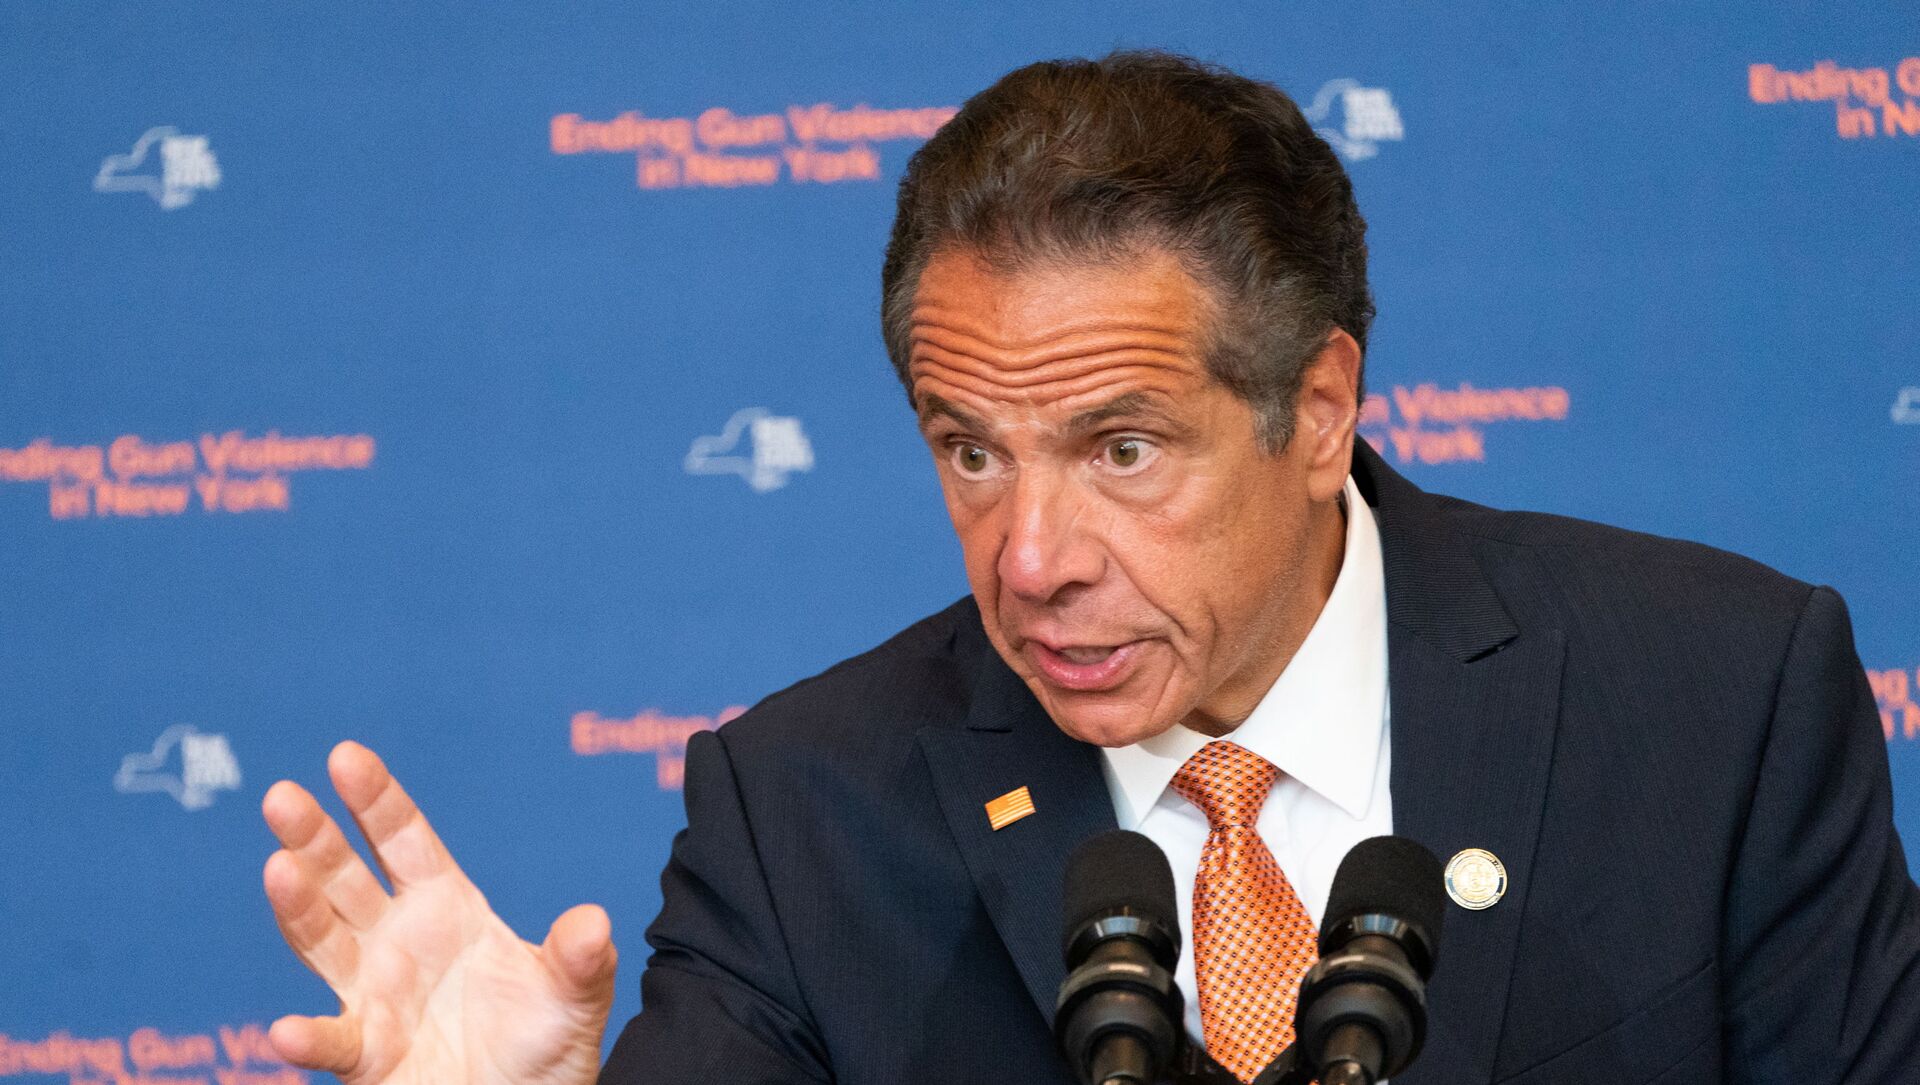 New York Governor Andrew Cuomo speaks during a news conference, to make an announcement that Gun Manufacturers are Liable for the harm their products cause, in New York City, New York, U.S., July 6, 2021 - Sputnik International, 1920, 03.08.2021